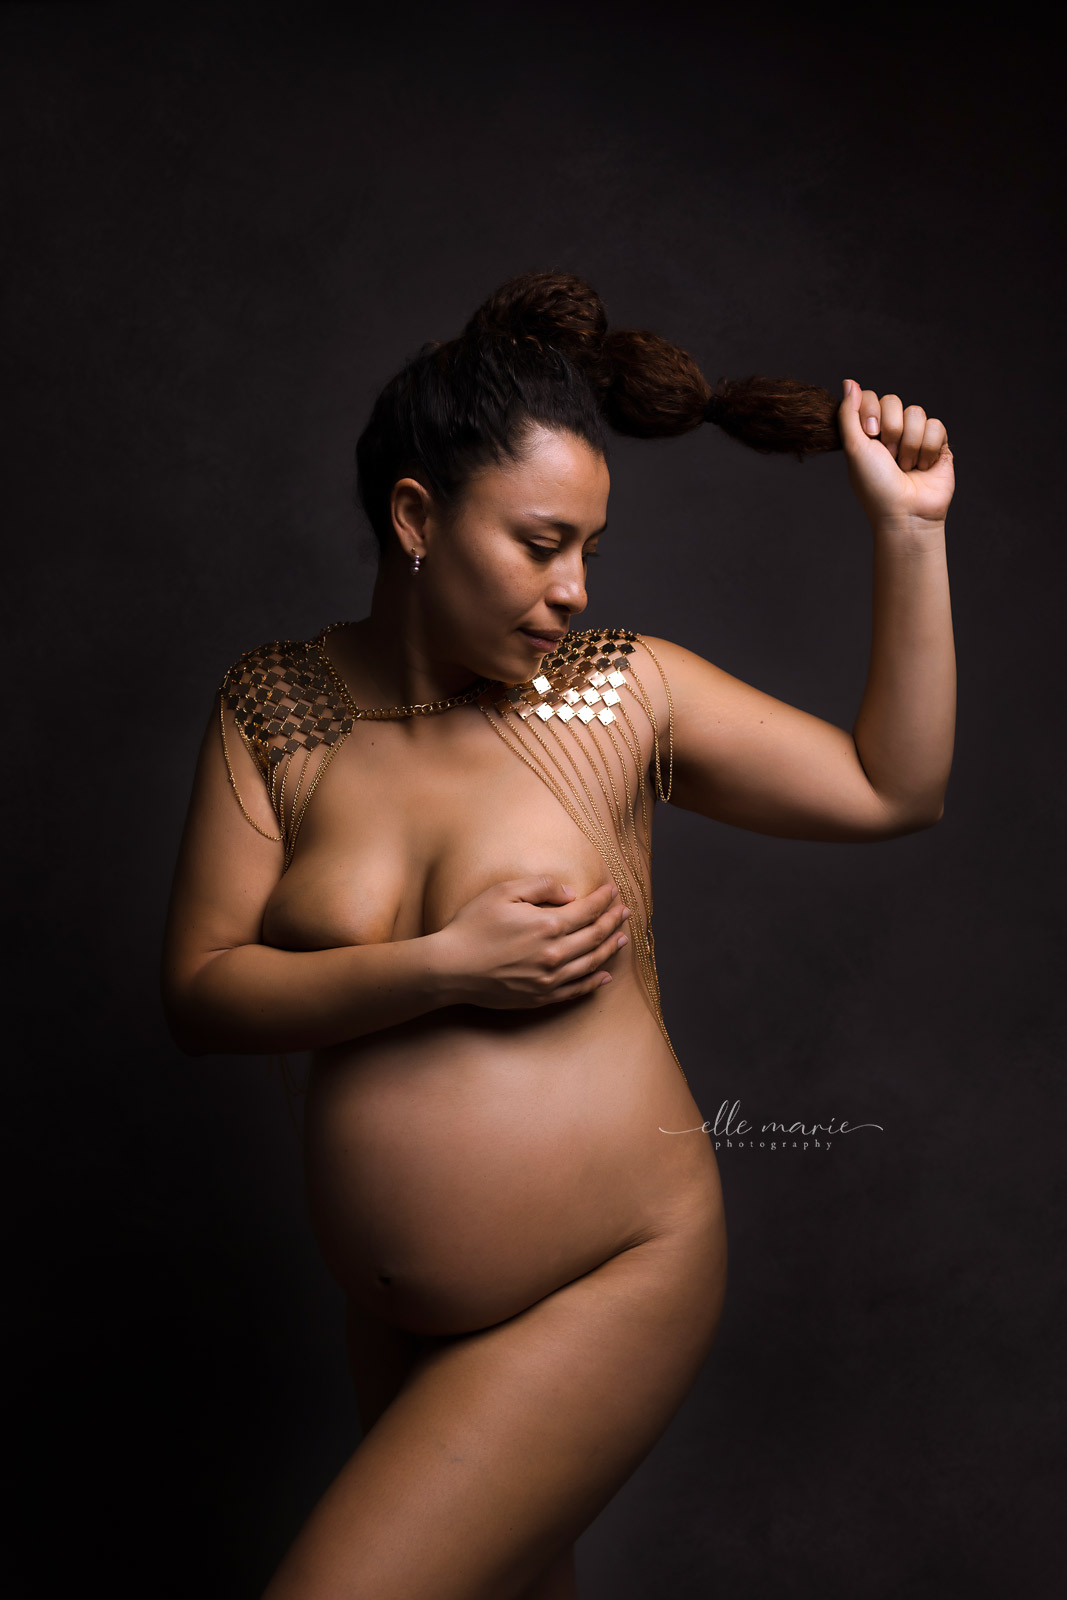 a pregnant woman posing nude